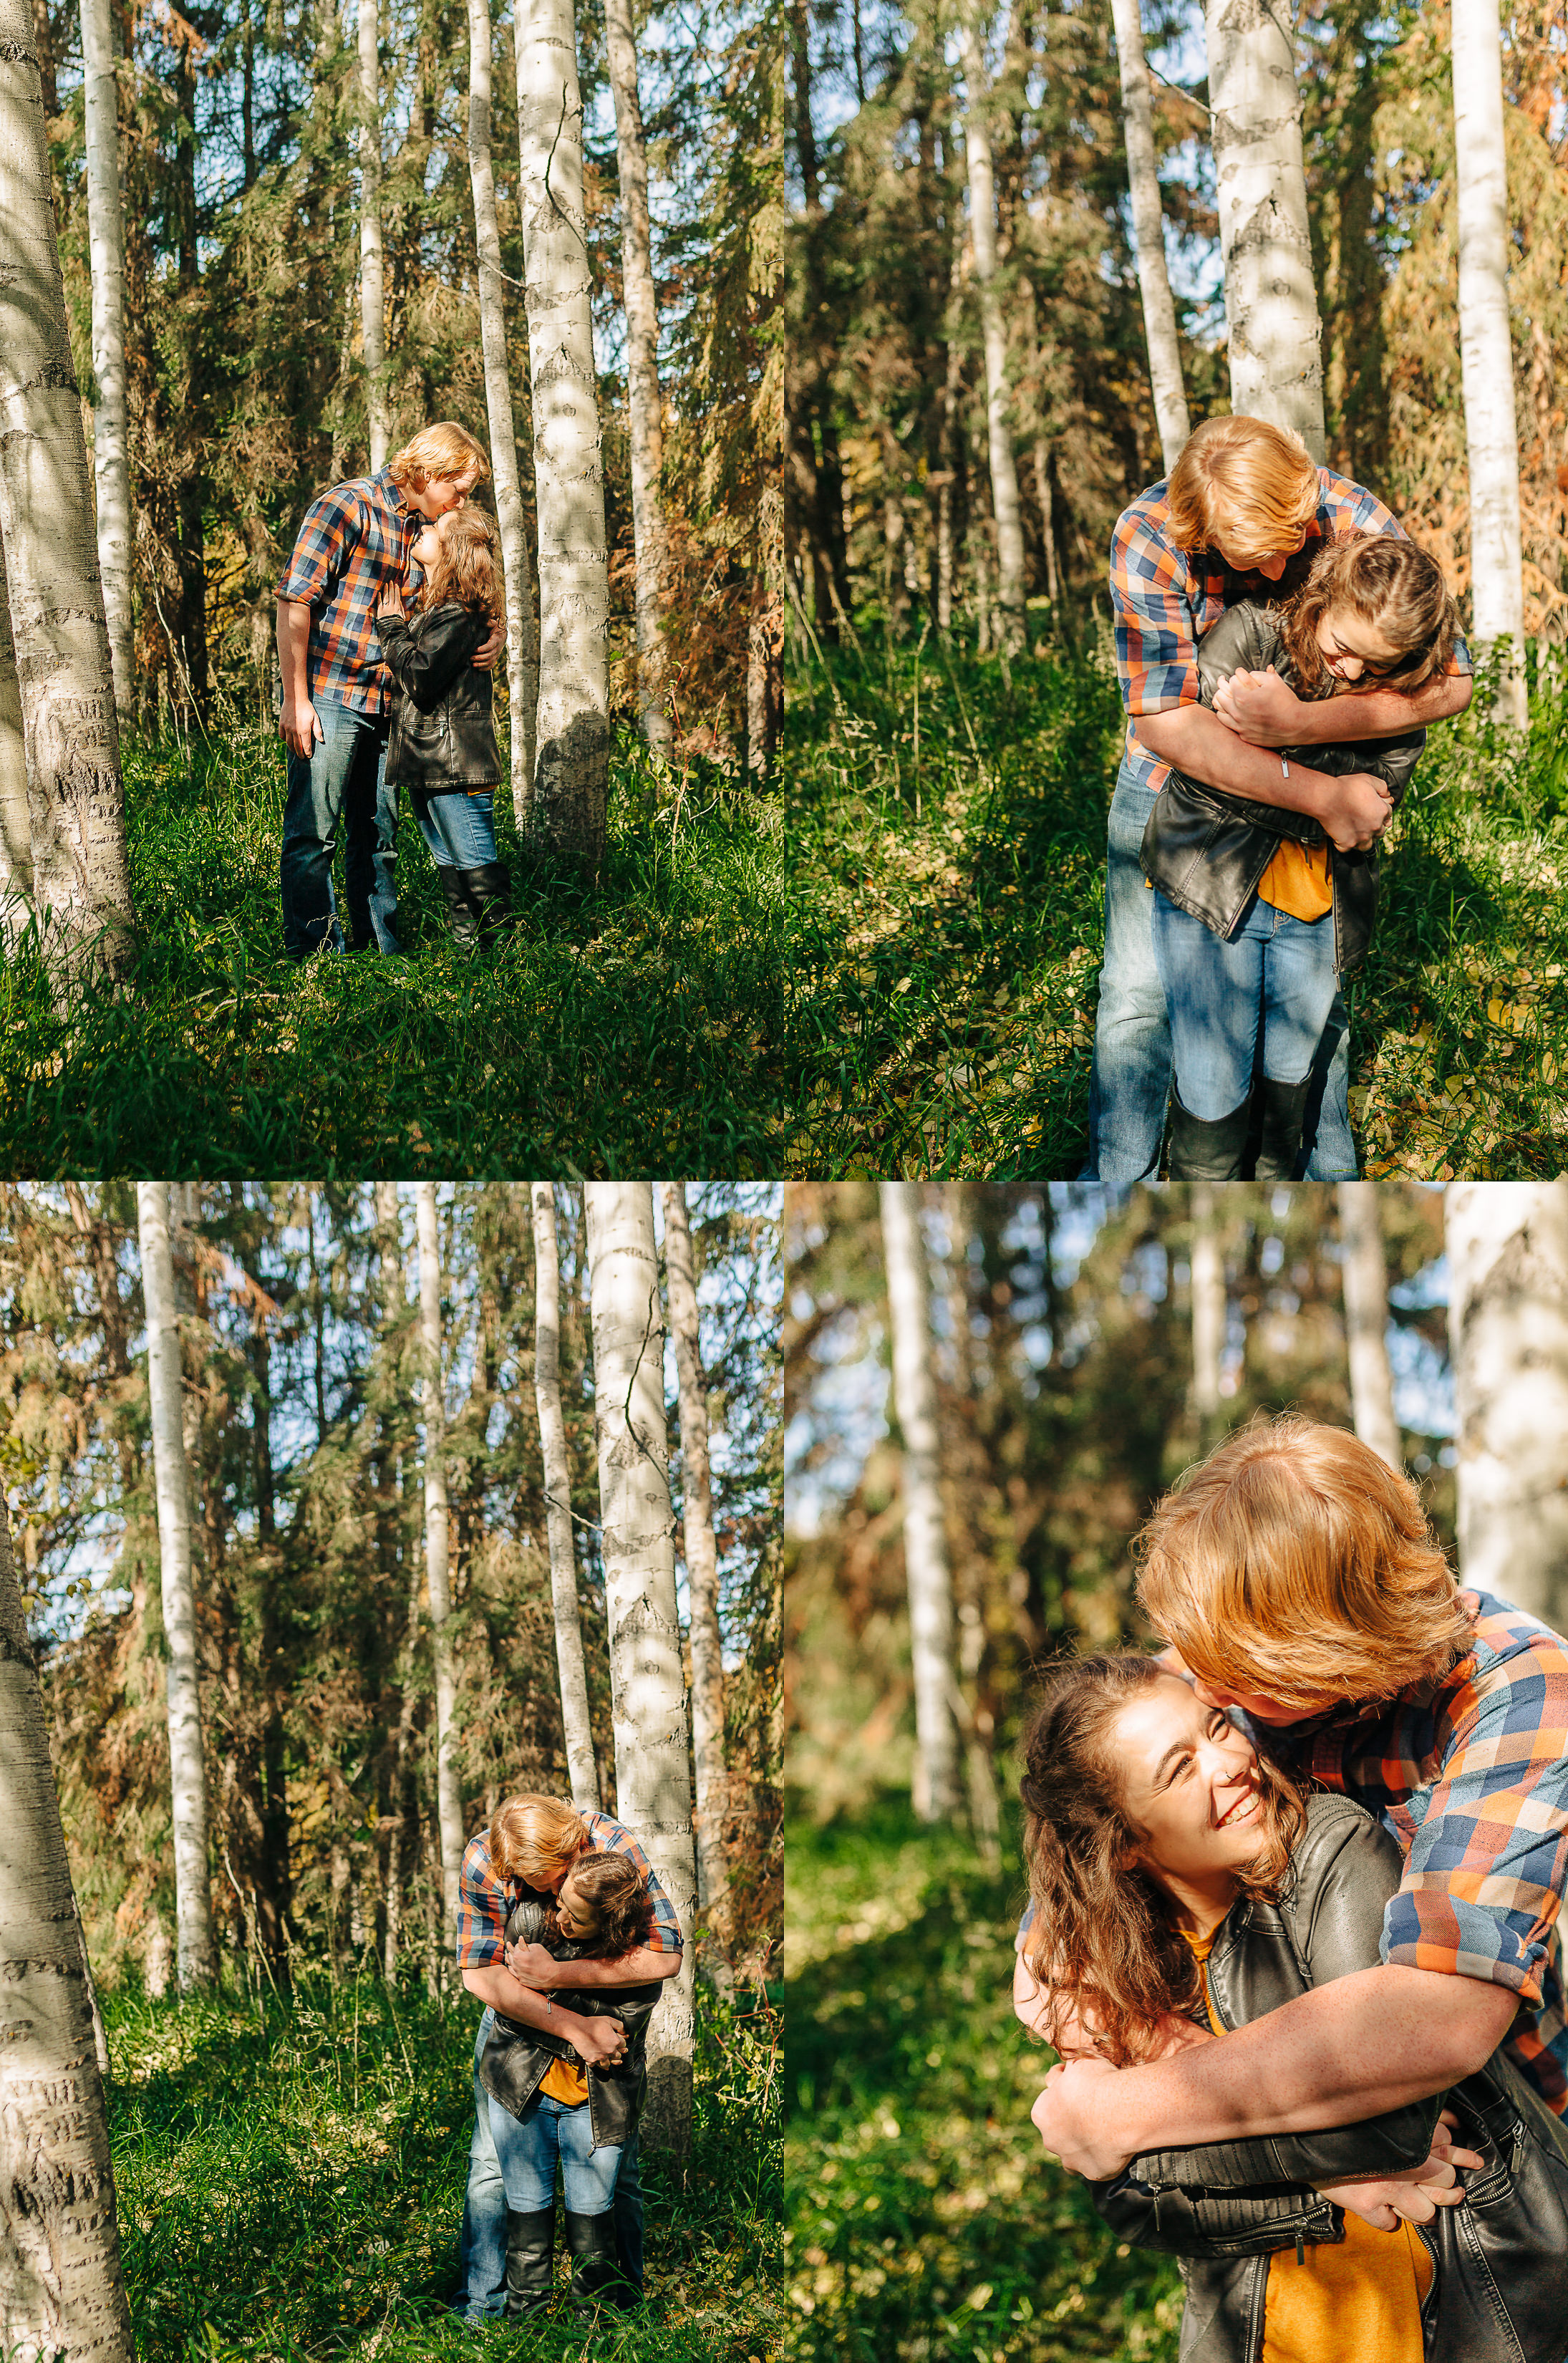 standing in trees engagement photos leather jacket and plaid